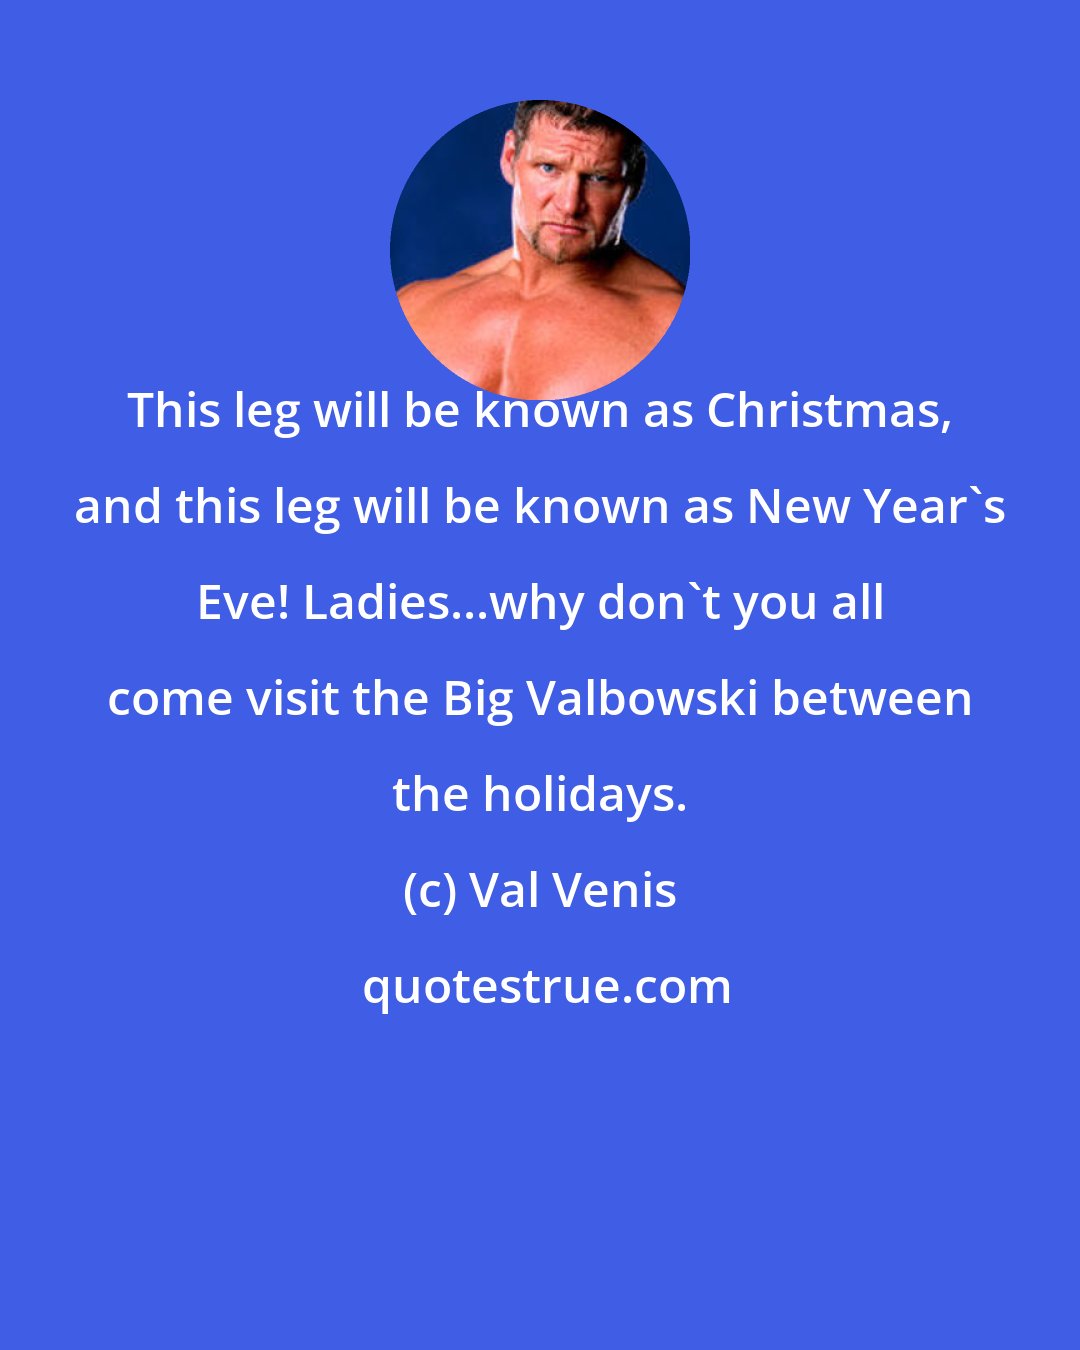 Val Venis: This leg will be known as Christmas, and this leg will be known as New Year's Eve! Ladies...why don't you all come visit the Big Valbowski between the holidays.